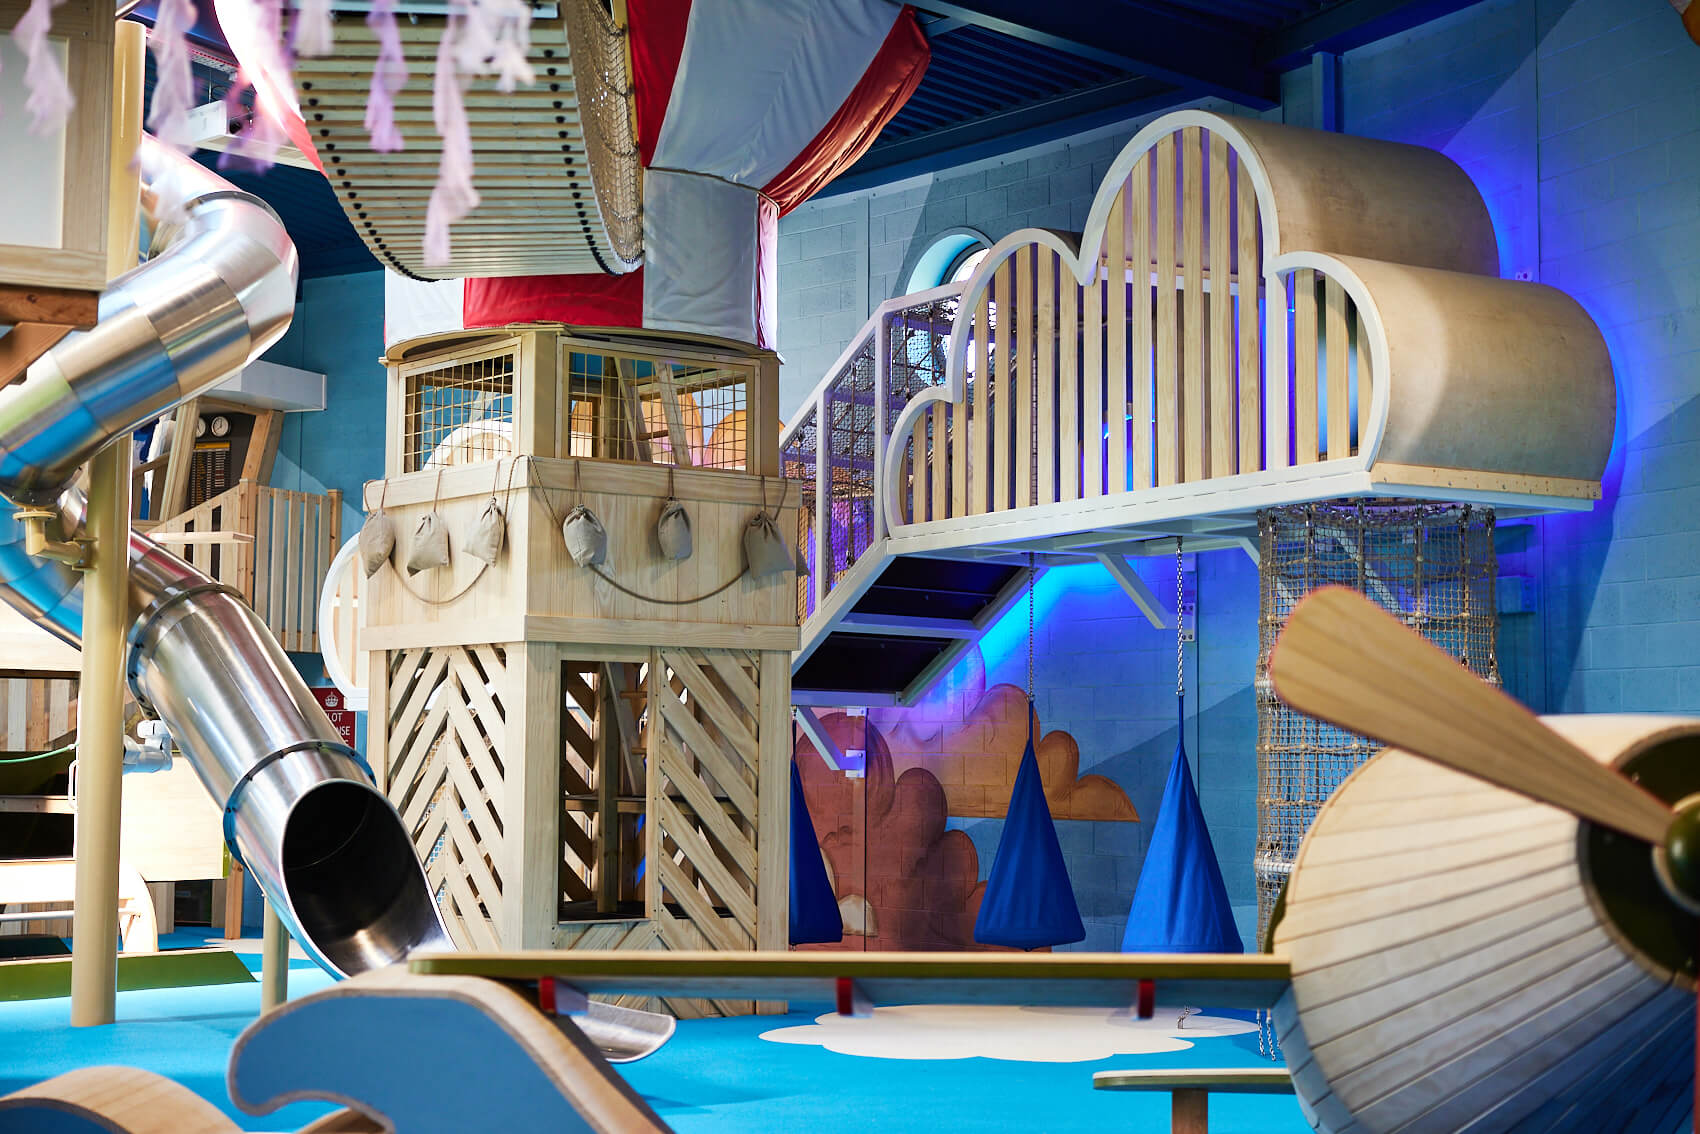 Hot air balloon and slide at Playhive, indoor play centre